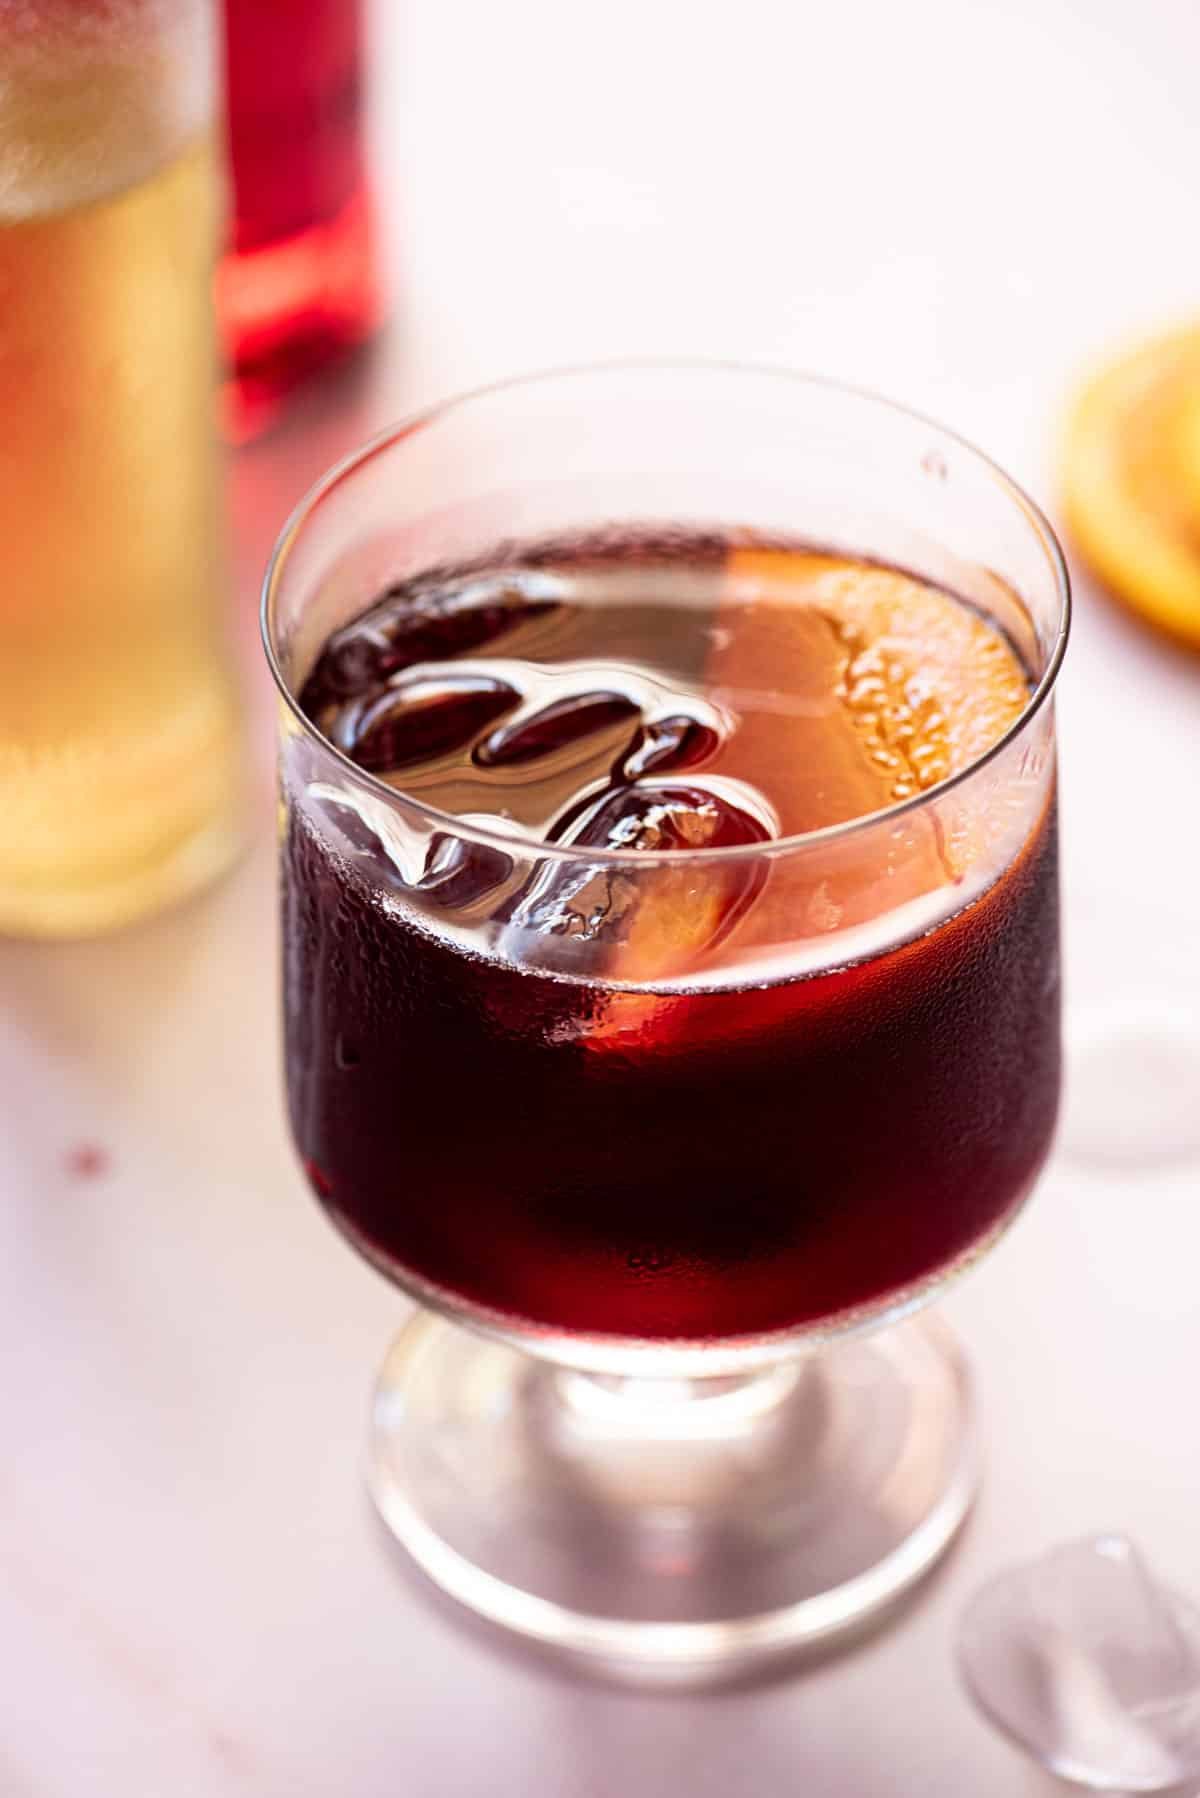 A close up of a red wine spritz in a glass with a slice of orange.